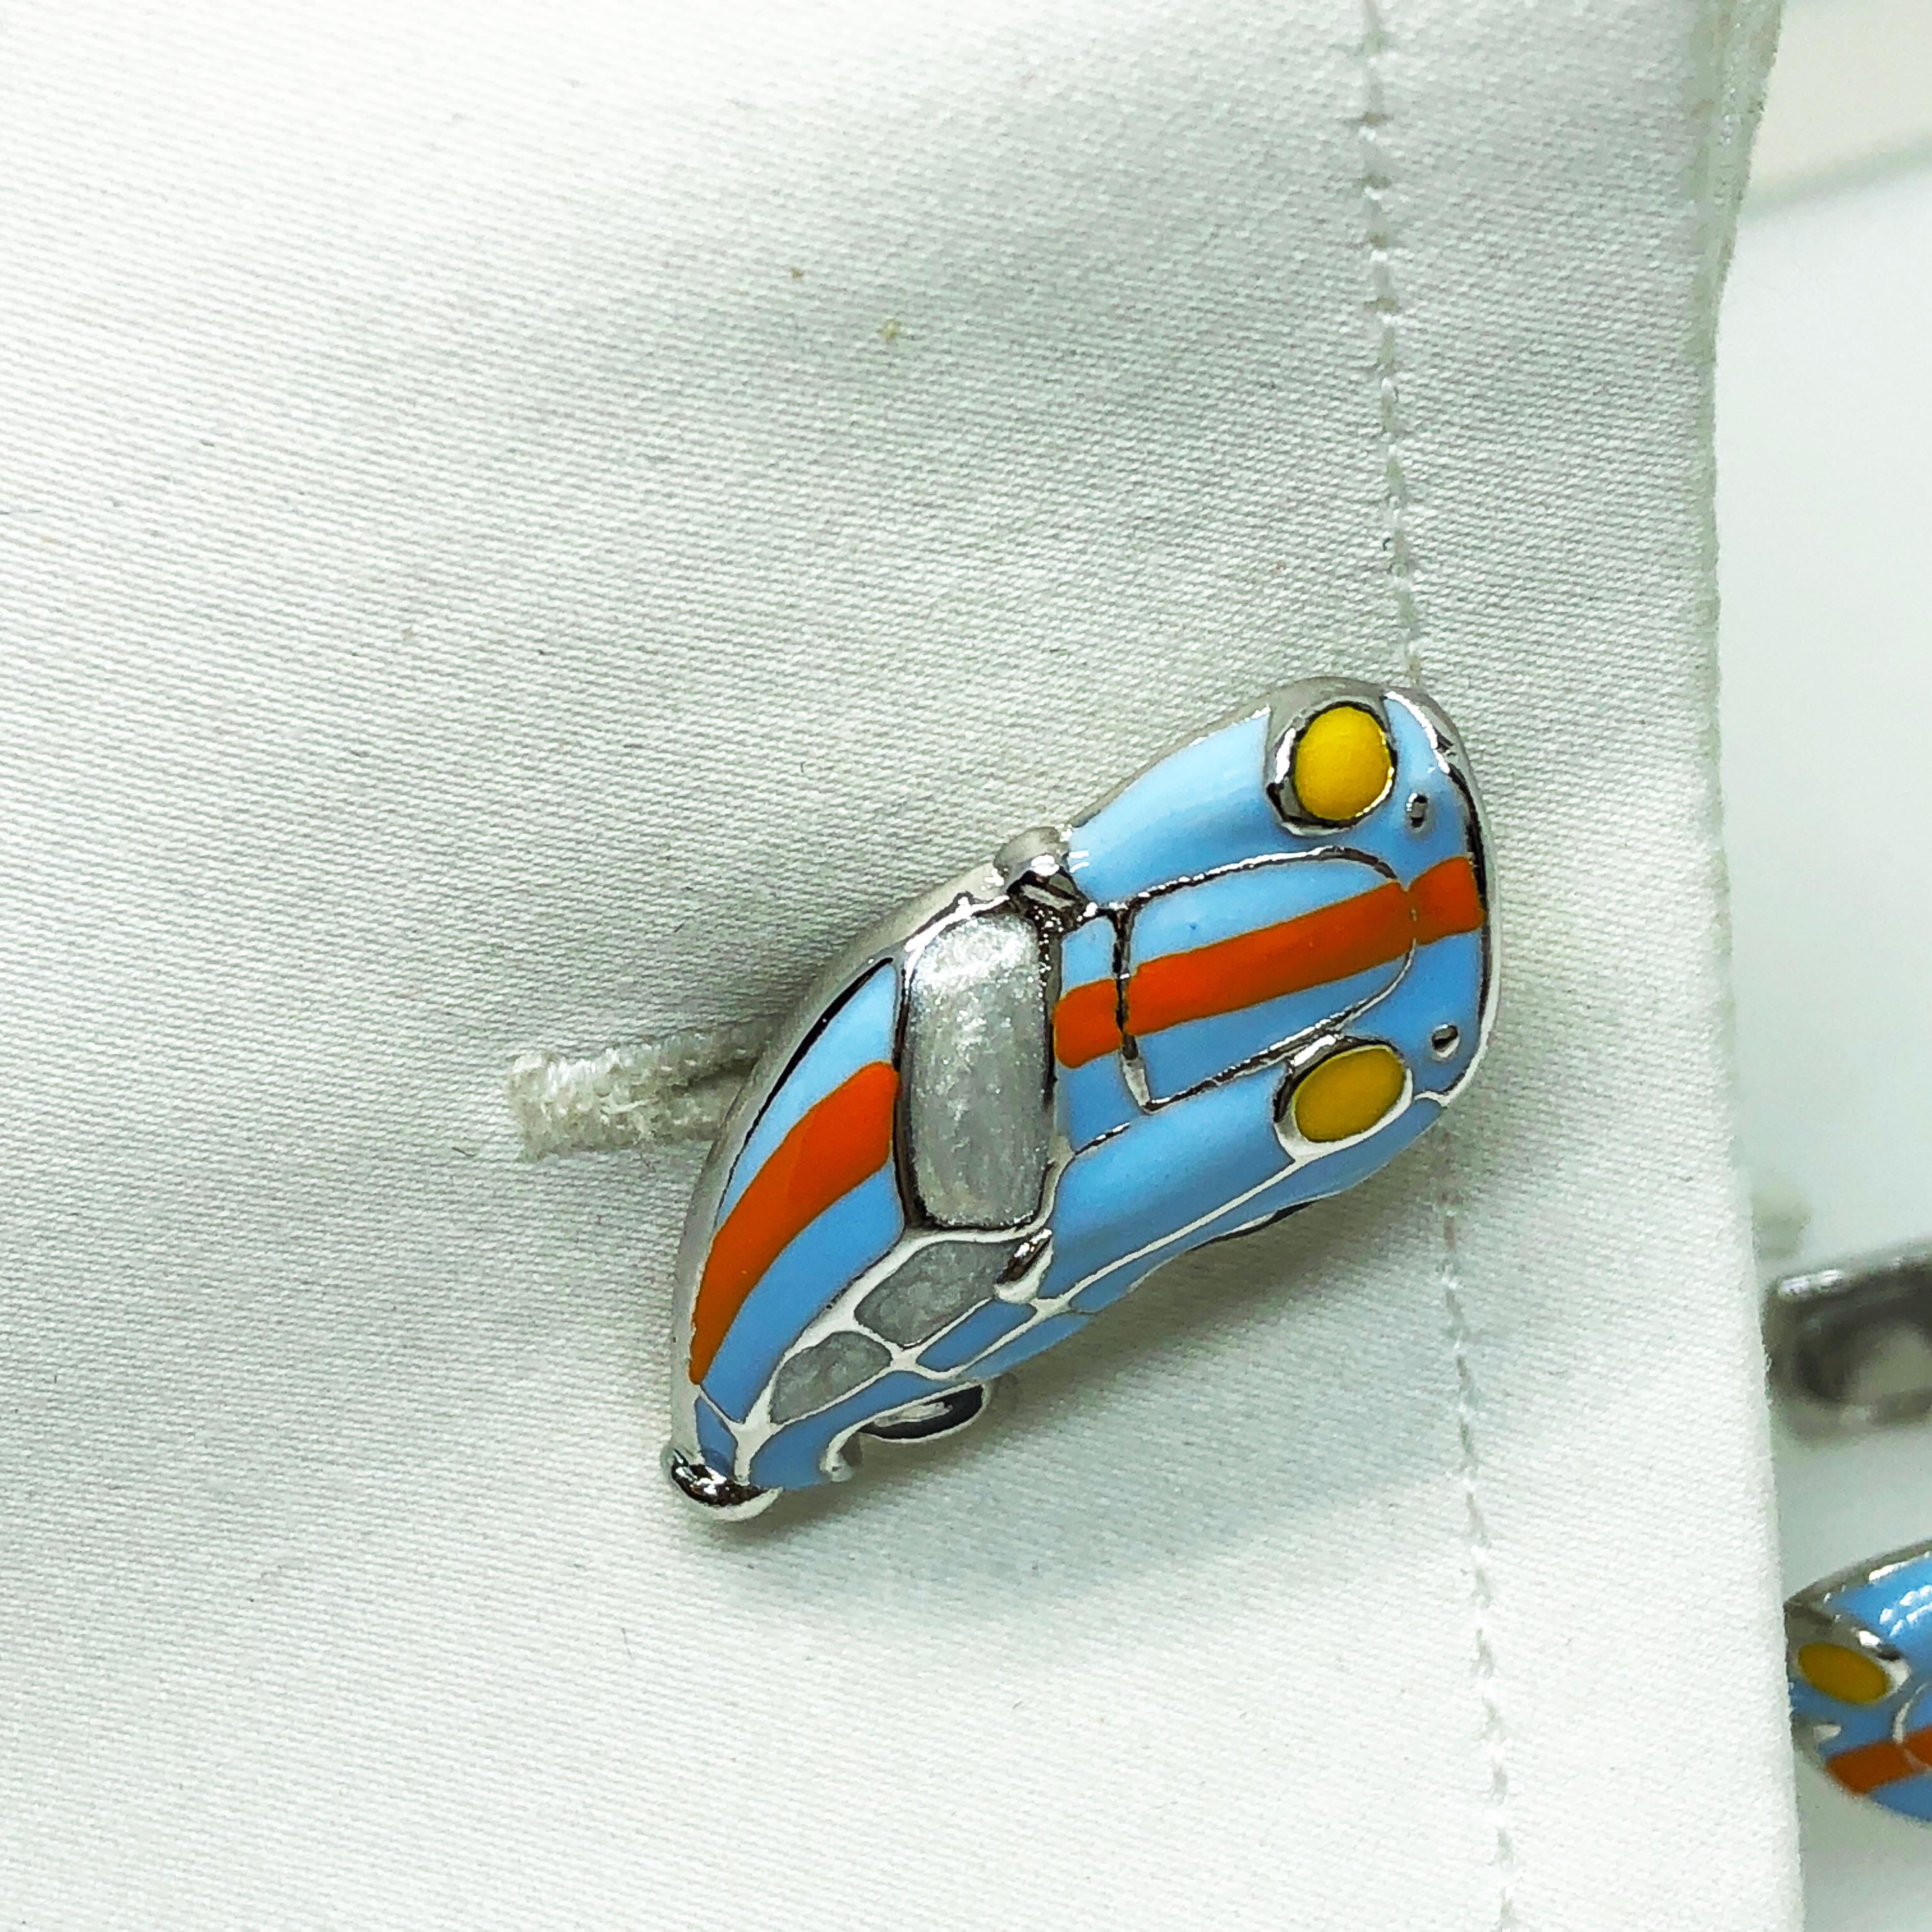 Berca Enameled Le Man’s Racing Color 911Porsche Shaped Sterling Silver Cufflinks 5